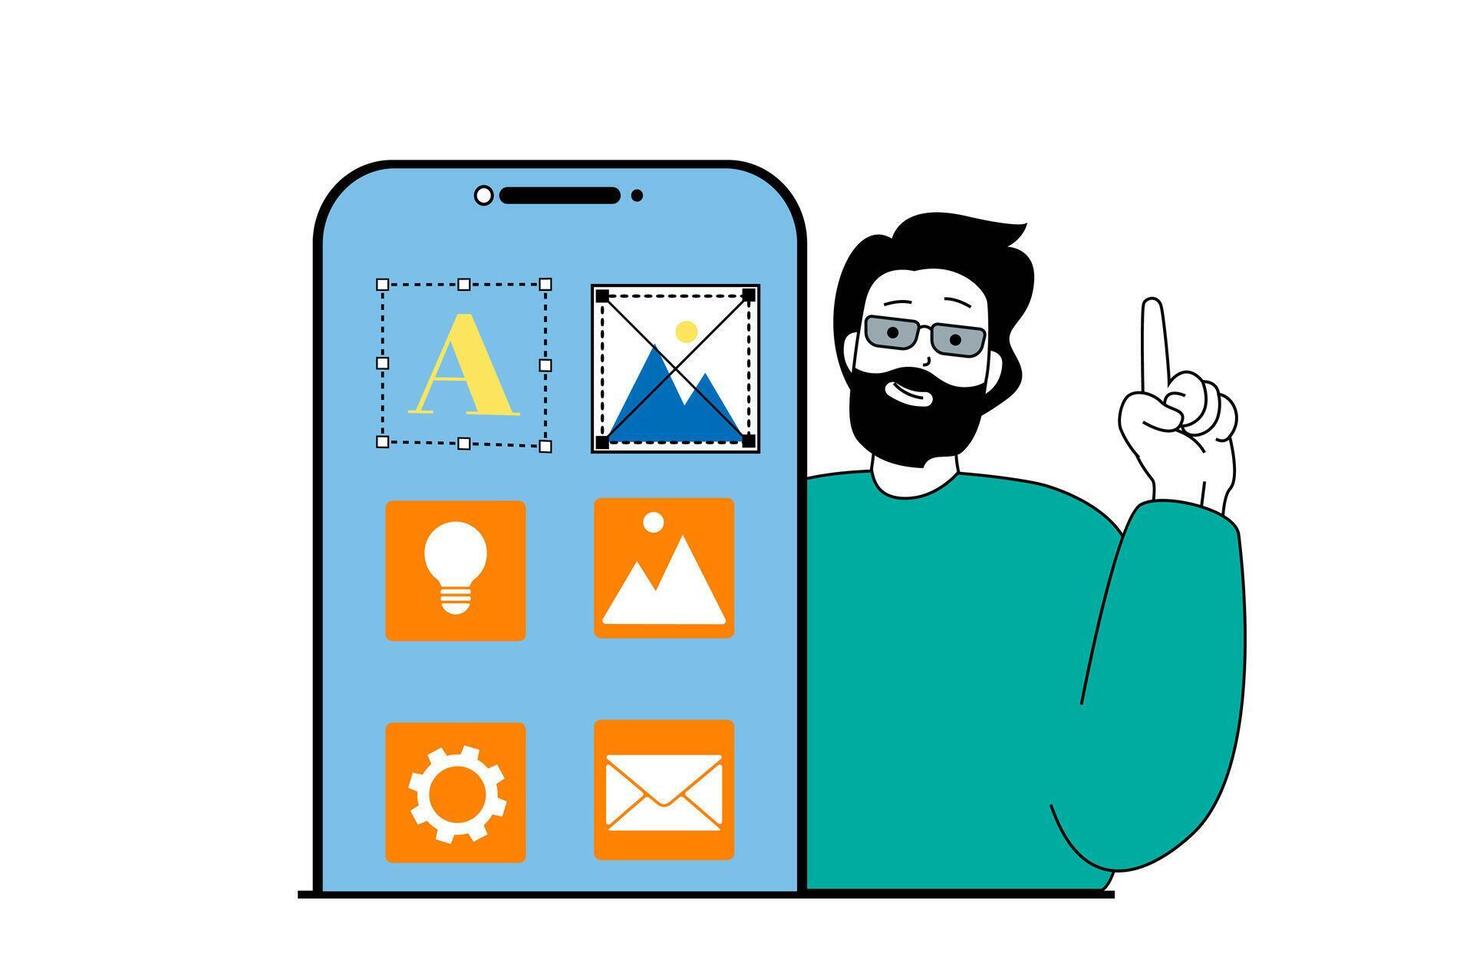 App development concept with people scene in flat web design. Man developing wireframe layout on mobile screen with buttons placement. Vector illustration for social media banner, marketing material.